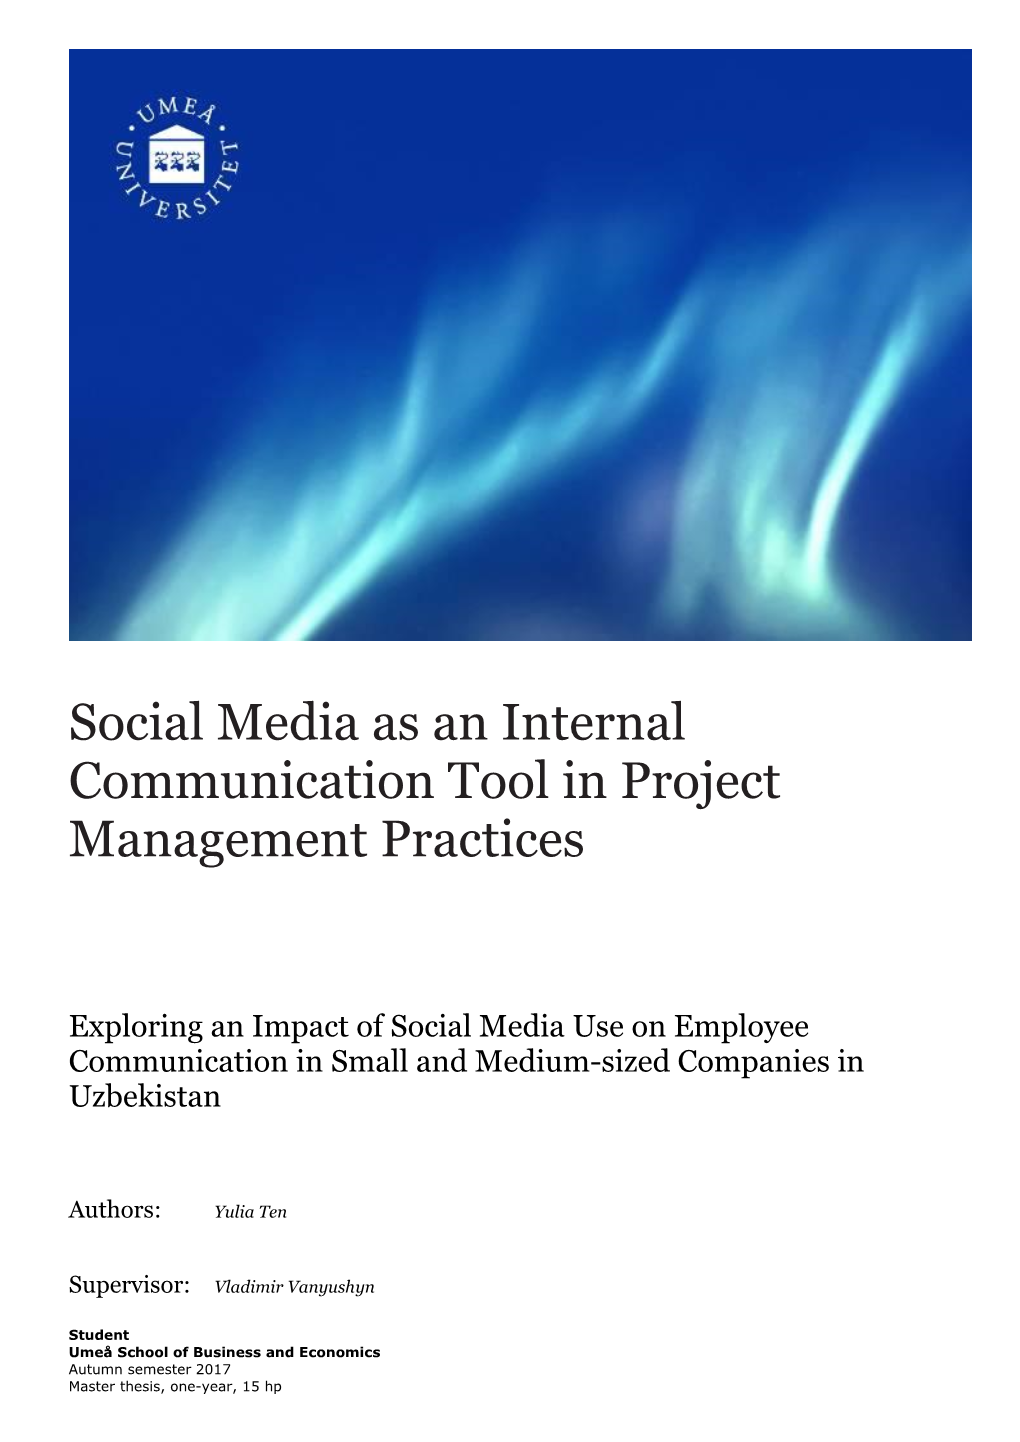 Social Media As an Internal Communication Tool in Project Management Practices